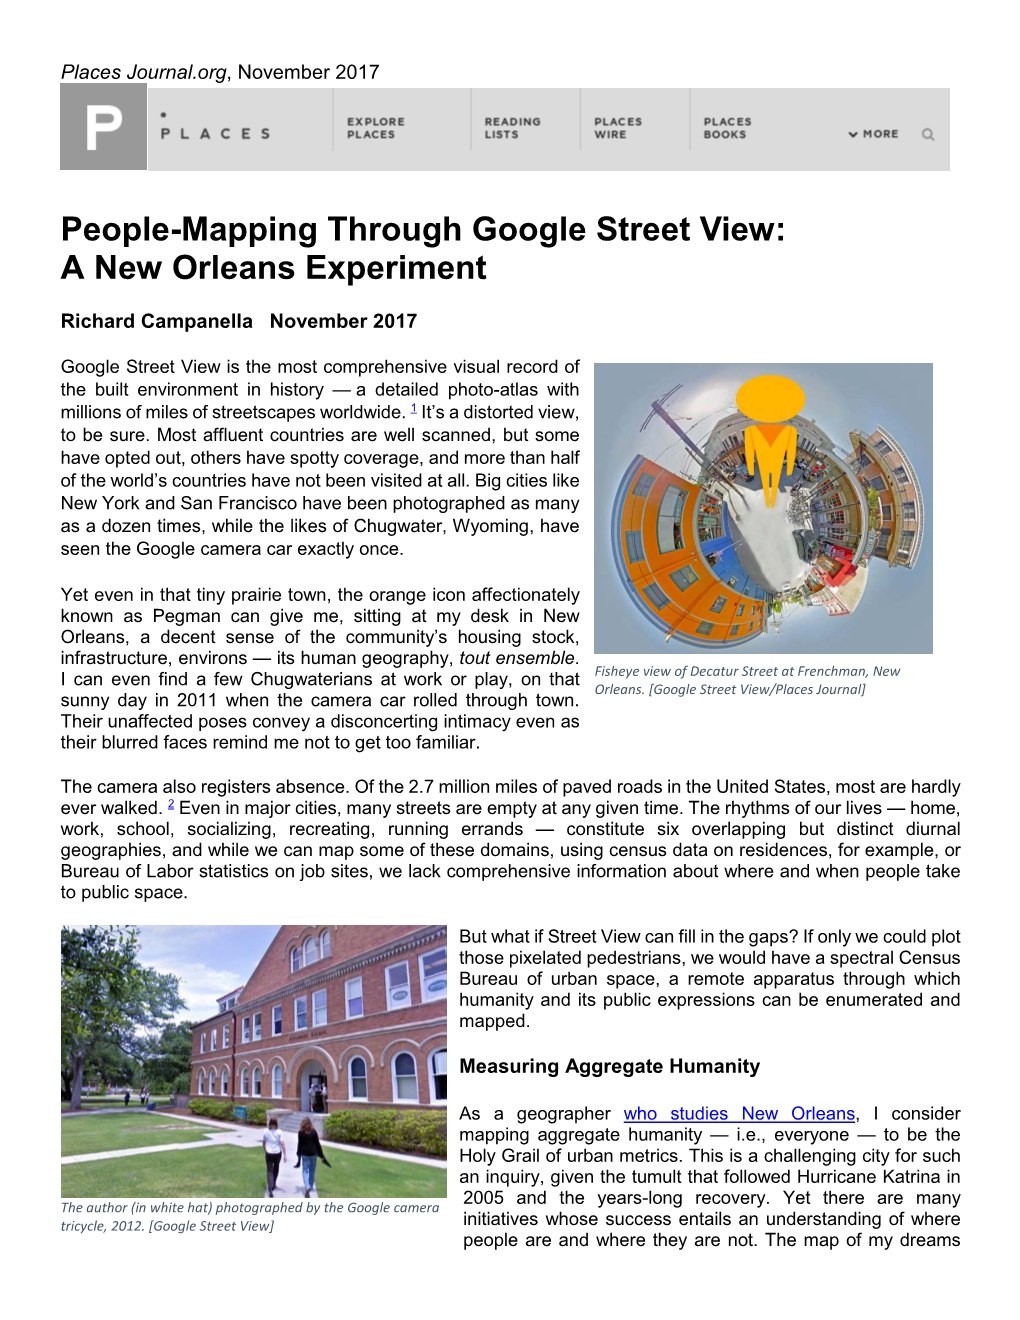 People-Mapping Through Google Street View: a New Orleans Experiment